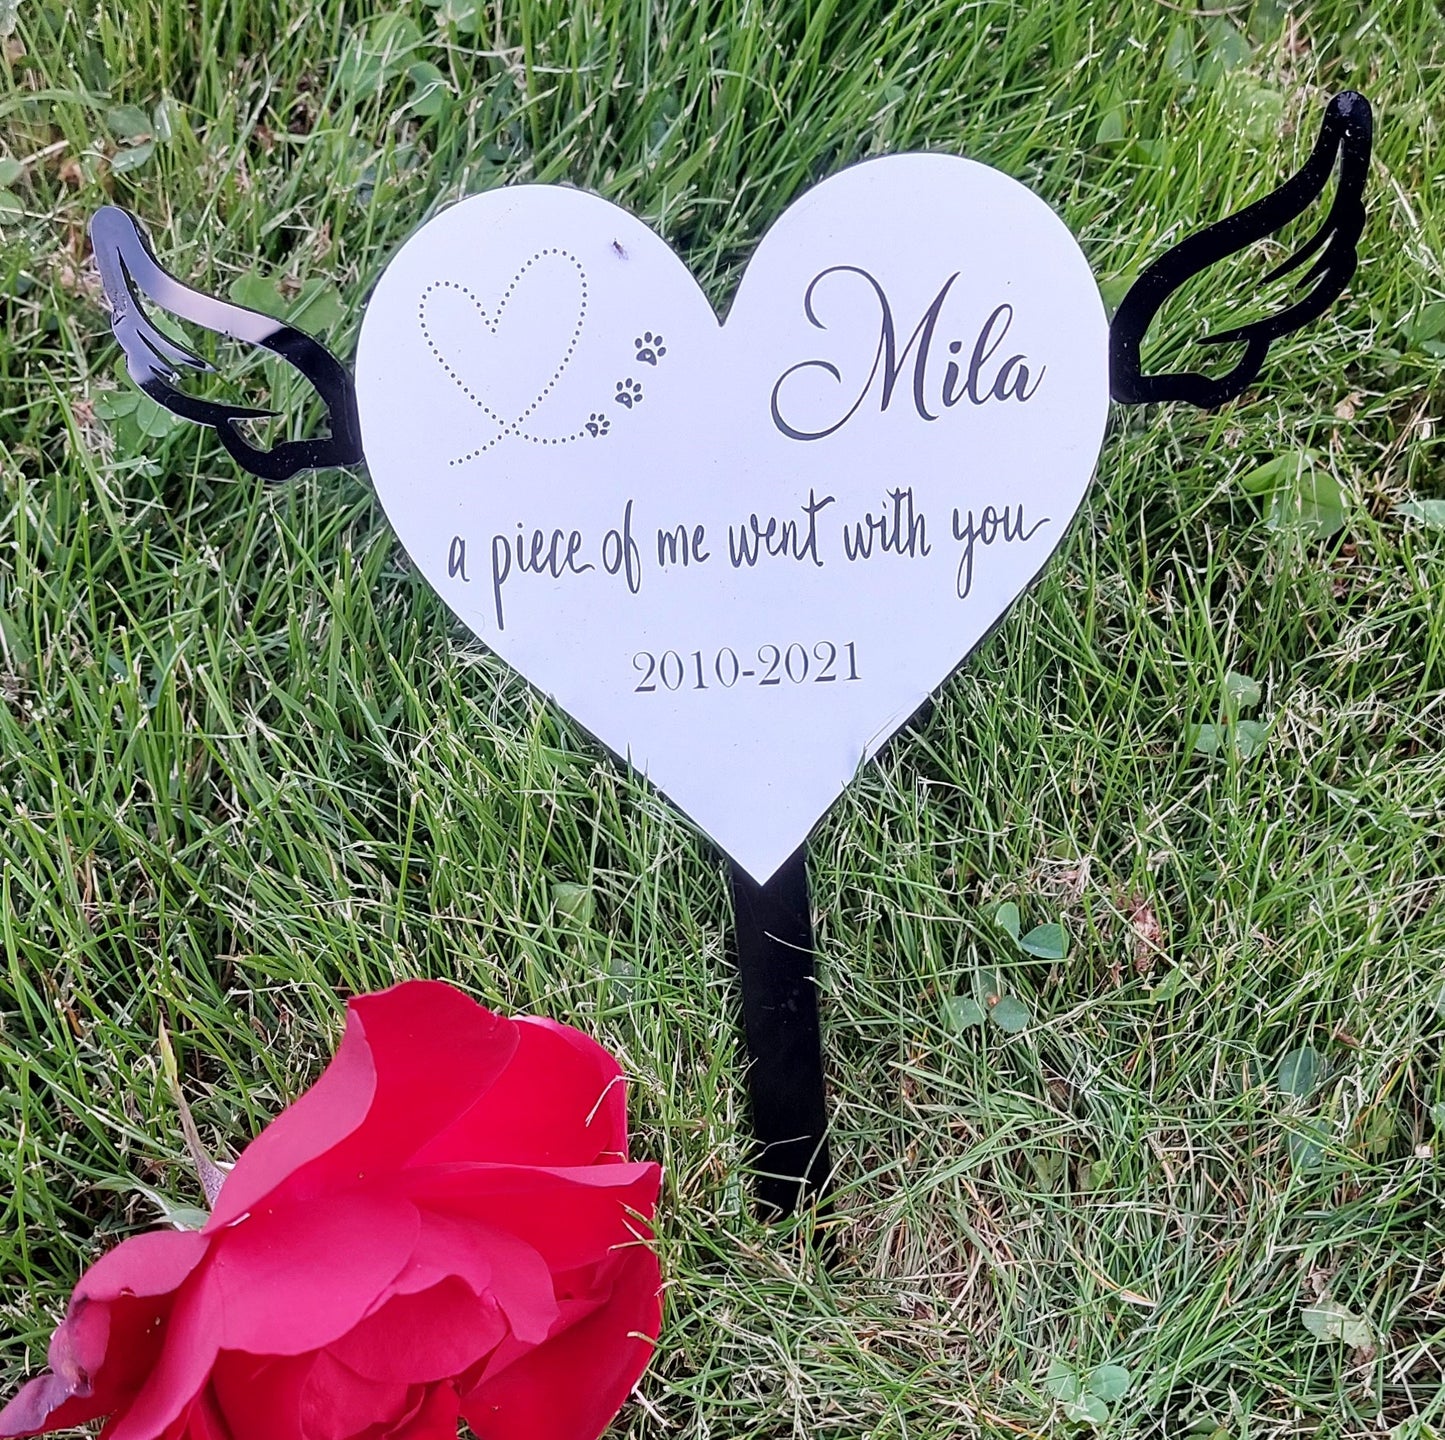 Personalised engraved garden memorial  - Small - Etch Cetera 